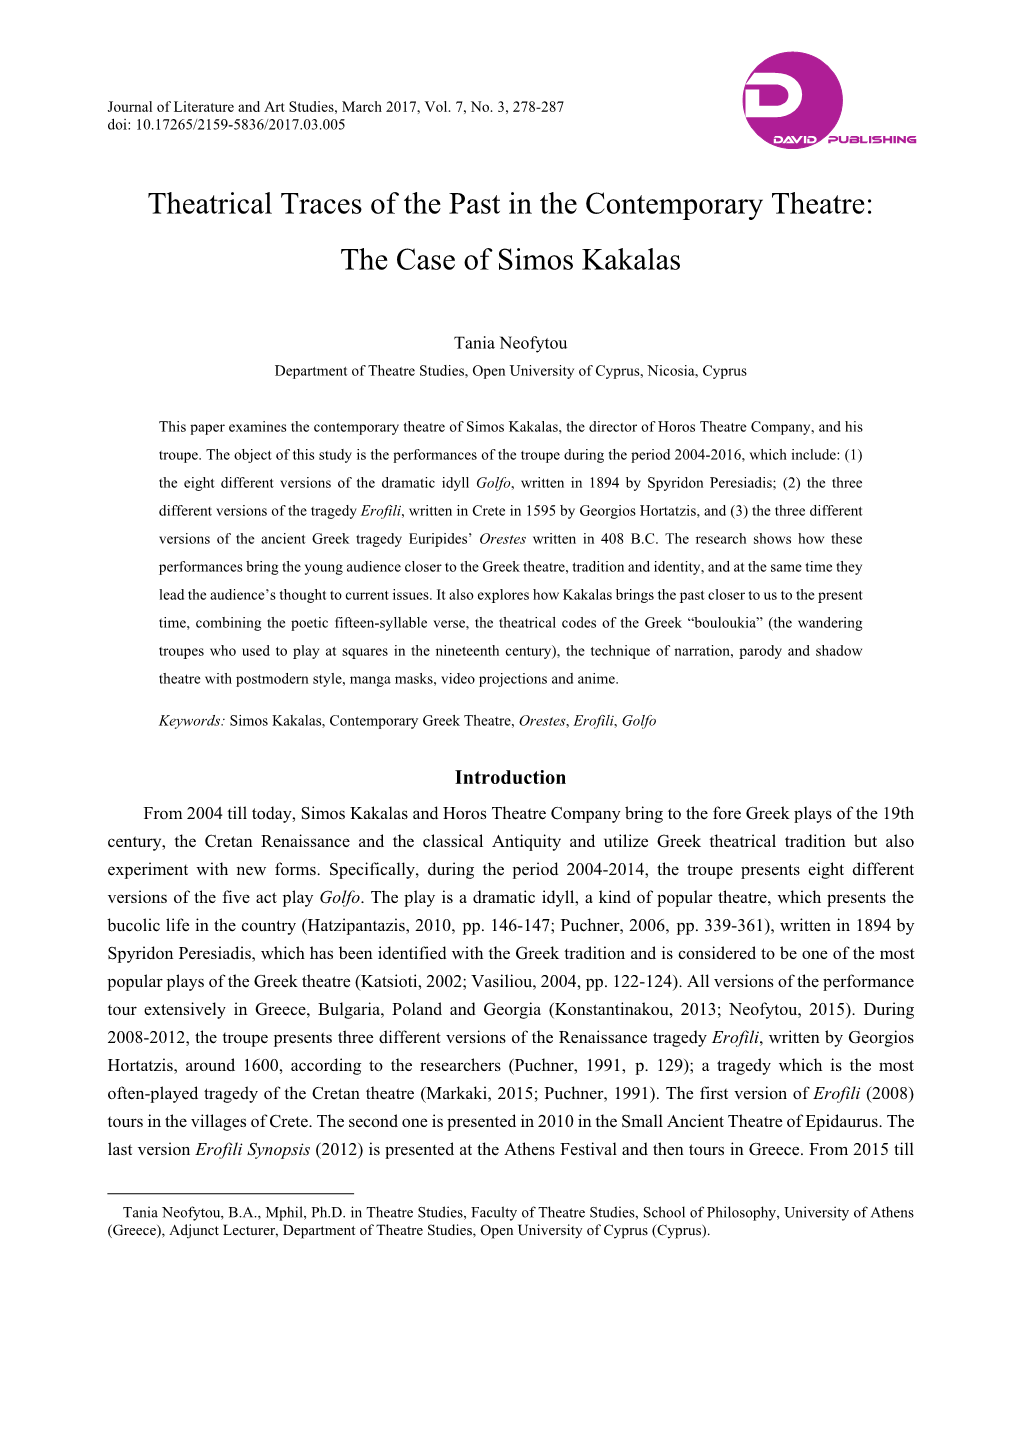 Theatrical Traces of the Past in the Contemporary Theatre: the Case of Simos Kakalas